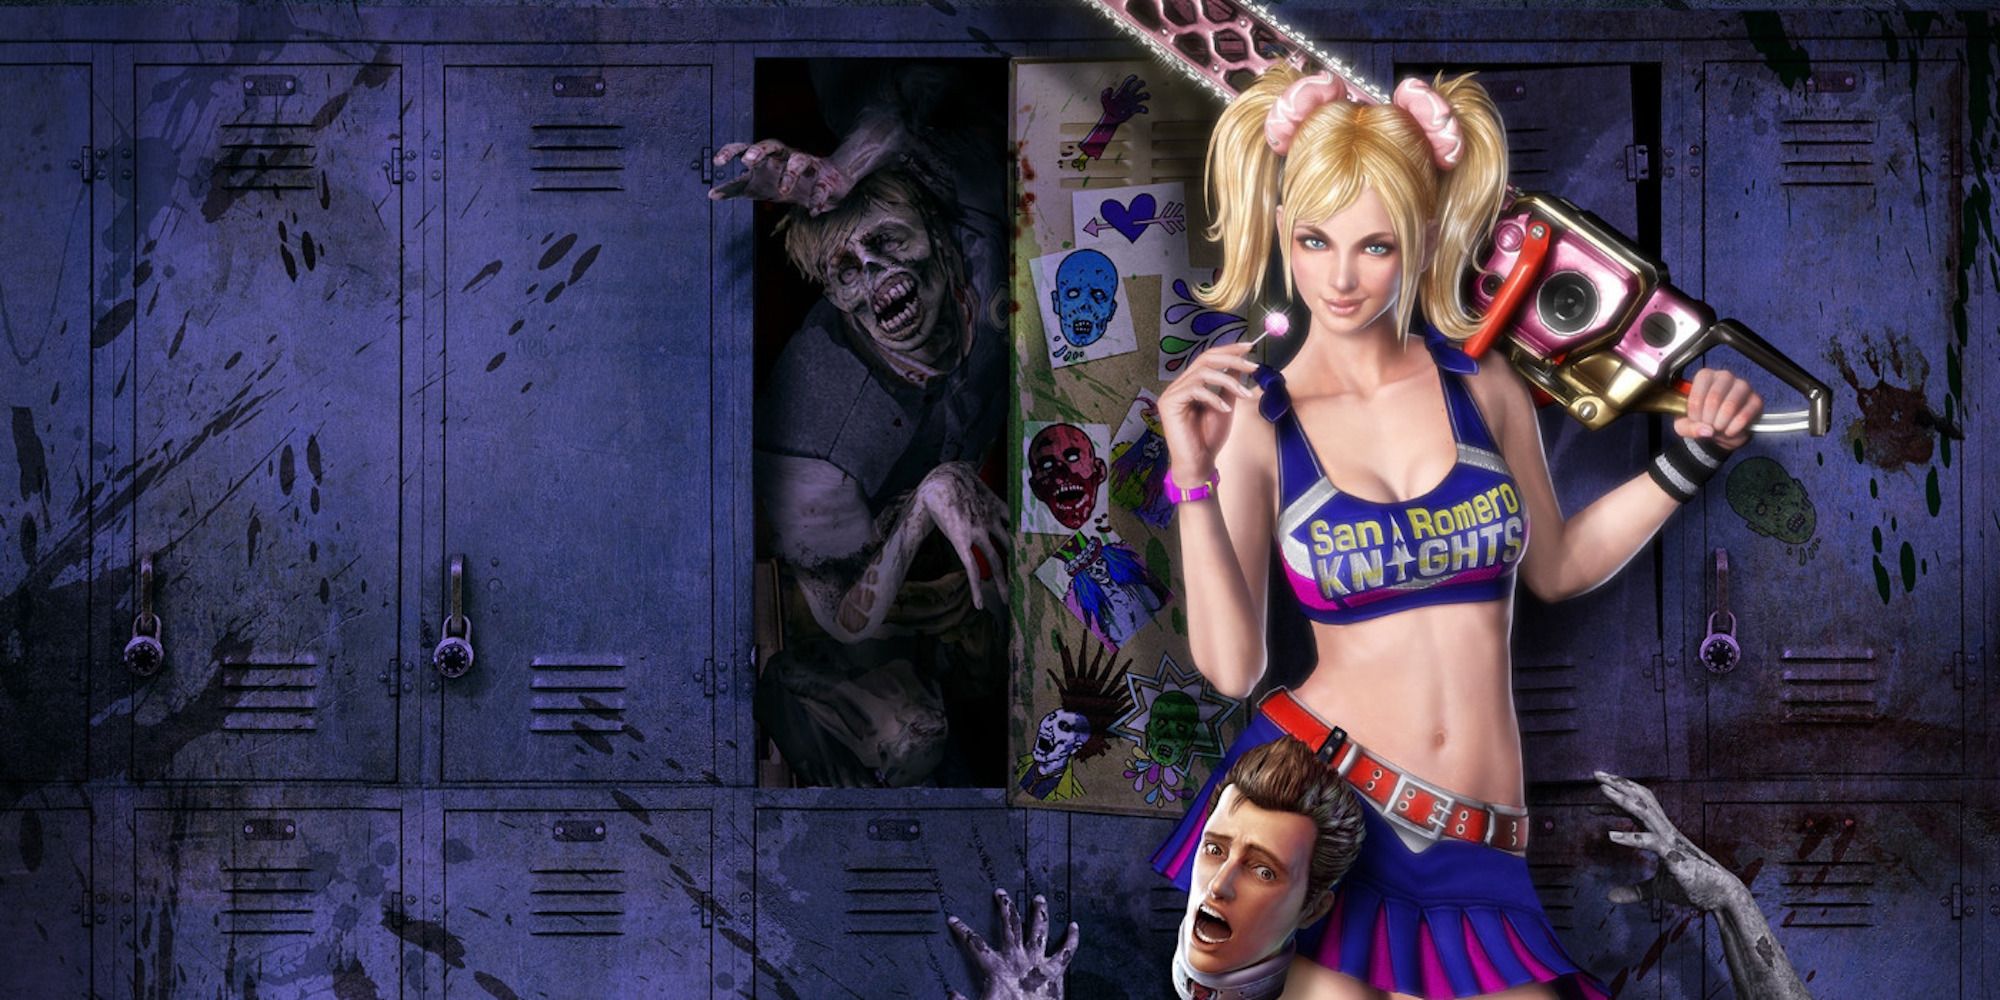 Promo art featuring characters in Lollipop Chainsaw